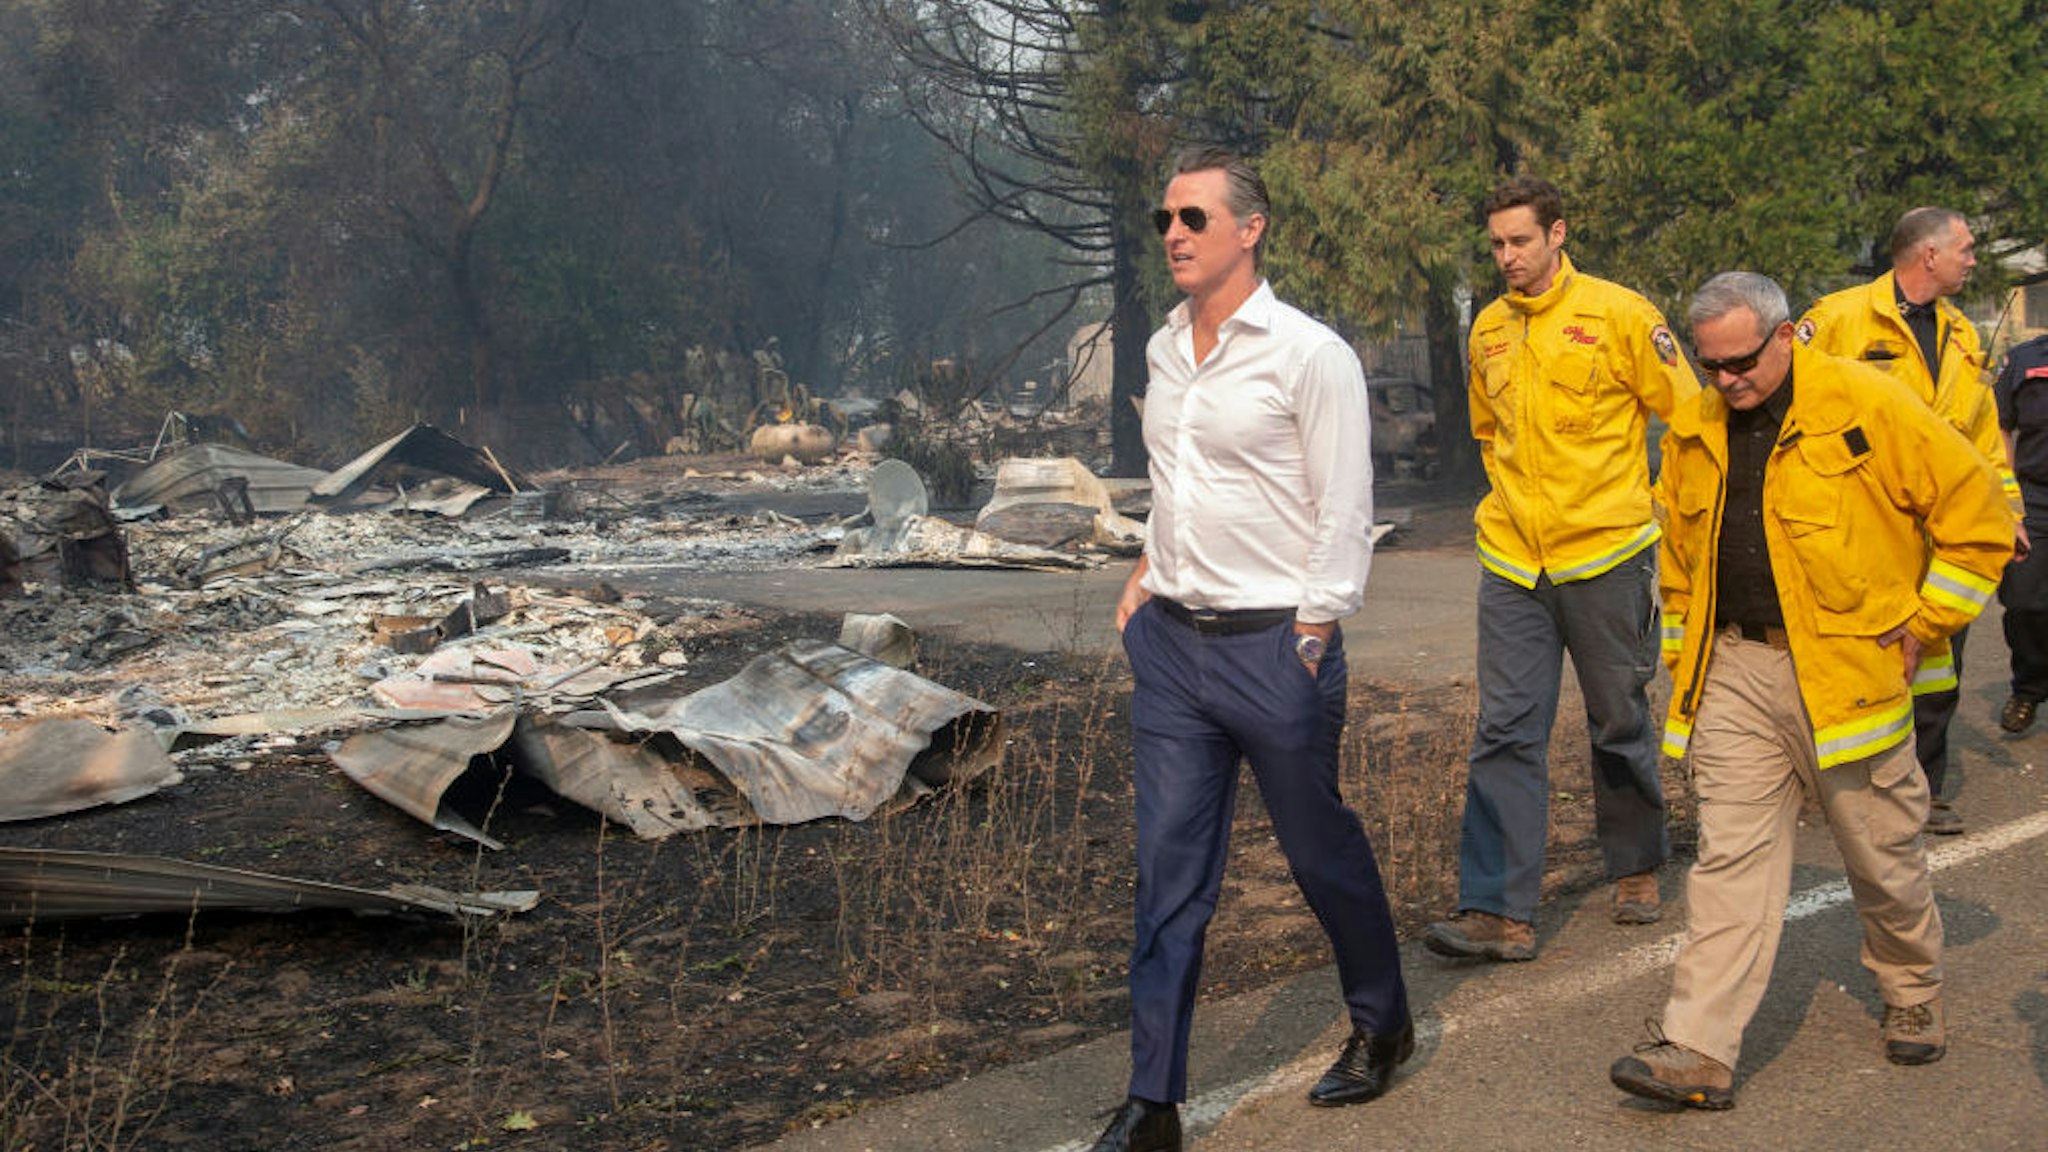 Gov. Gavin Newsom tours a home destroyed in the Kincade Fire, Friday, Oct. 25, 2019, in Geyserville, Calif. (Karl Mondon/MediaNews Group/The Mercury News via Getty Images)